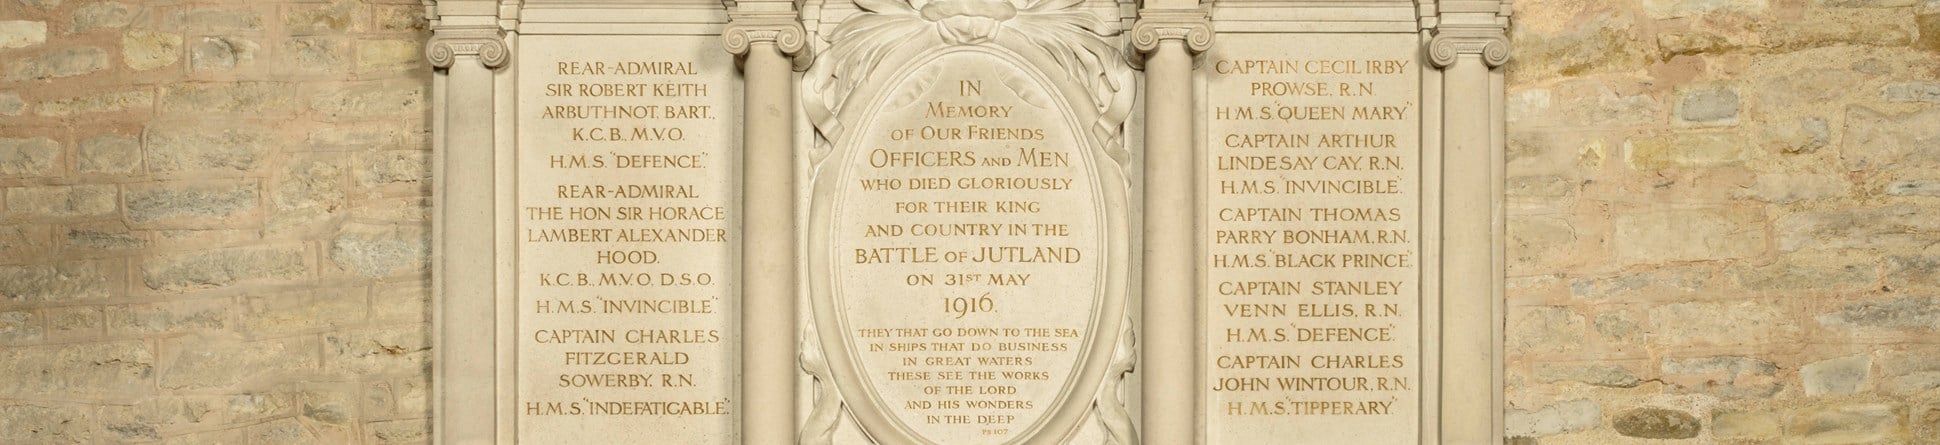 Jutland War Memorial Plaque at St Michael & All Angels Church, Brooksby near Melton Mowbray, Leicestershire. © Historic England